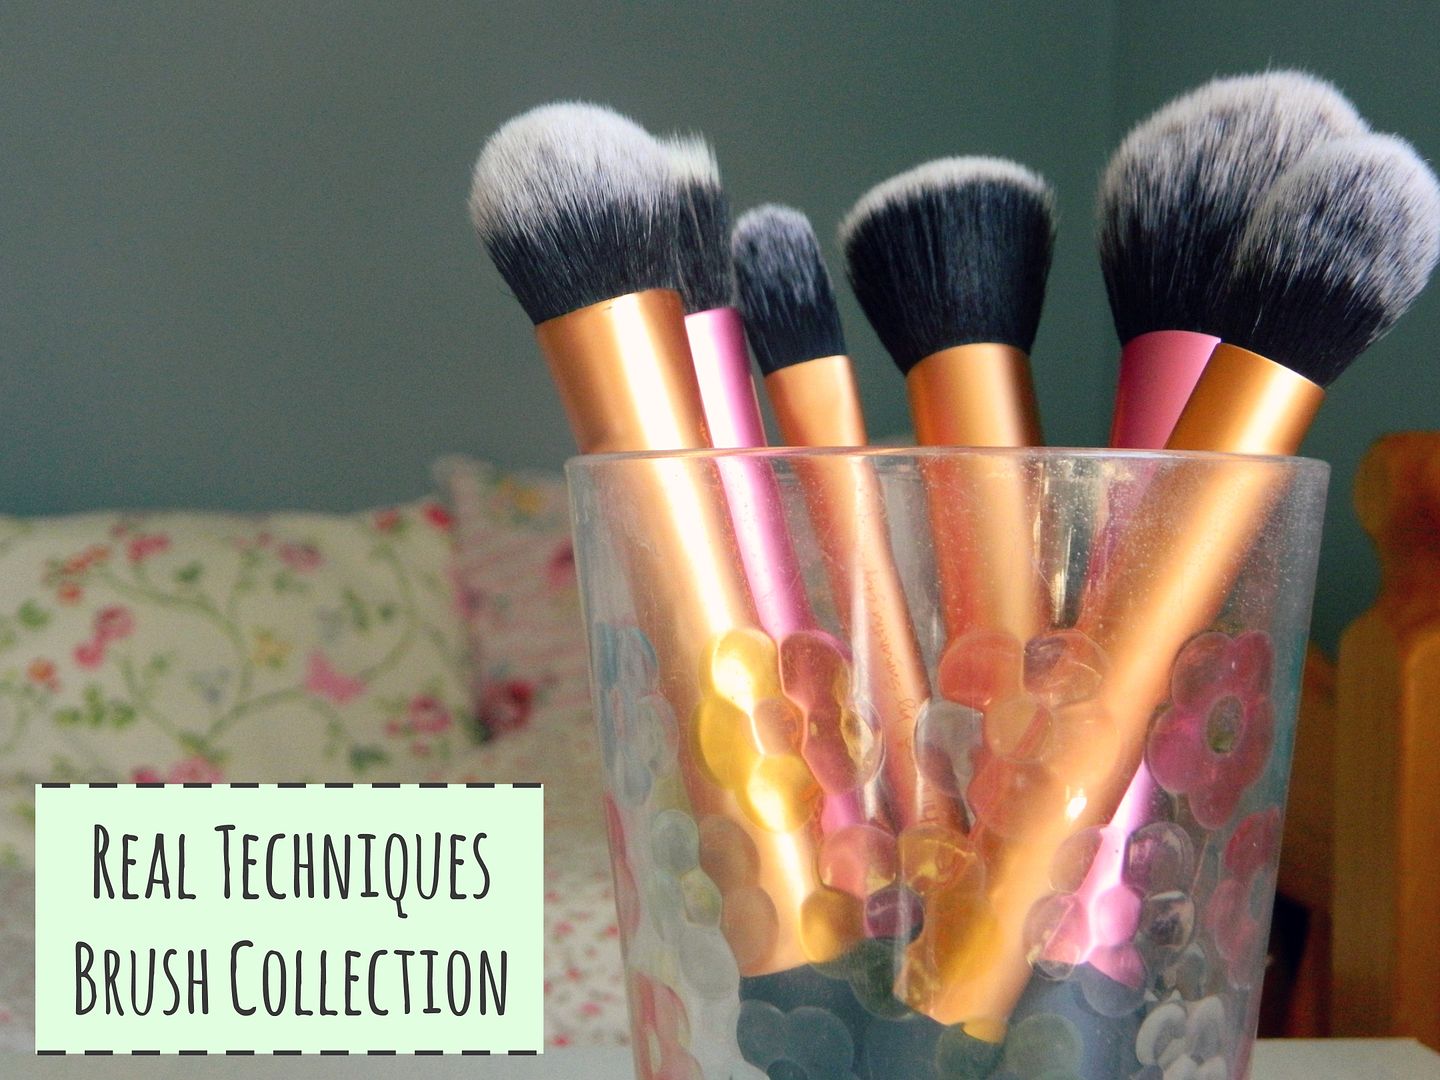 Real Techniques Makeup Brush Collection Review Belle-amie UK Beauty Fashion Lifestyle Blog